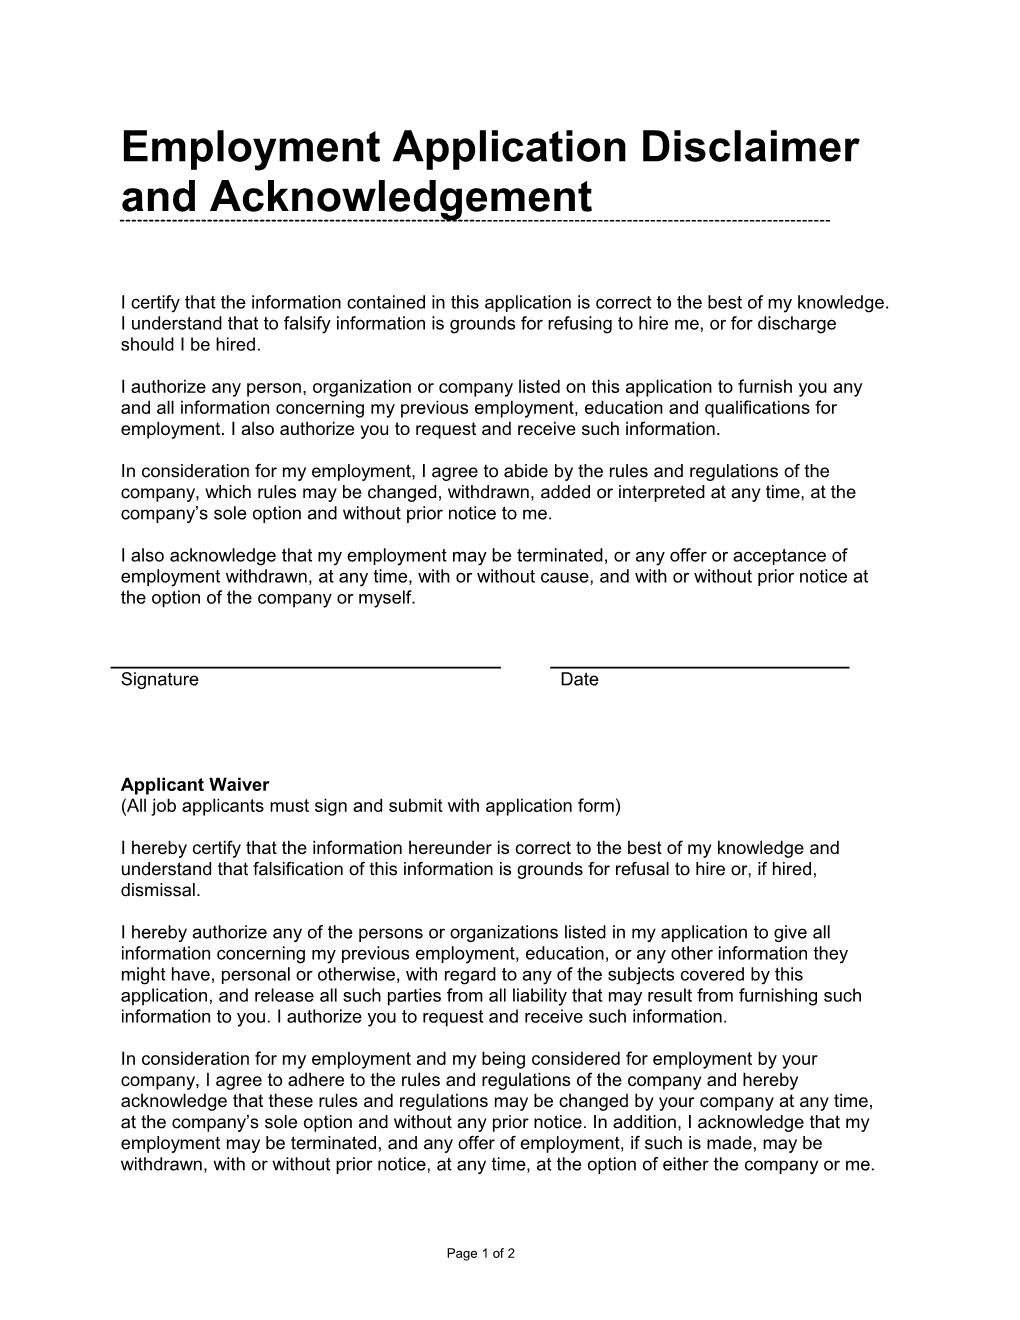 Employment Application Disclaimer and Acknowledgement